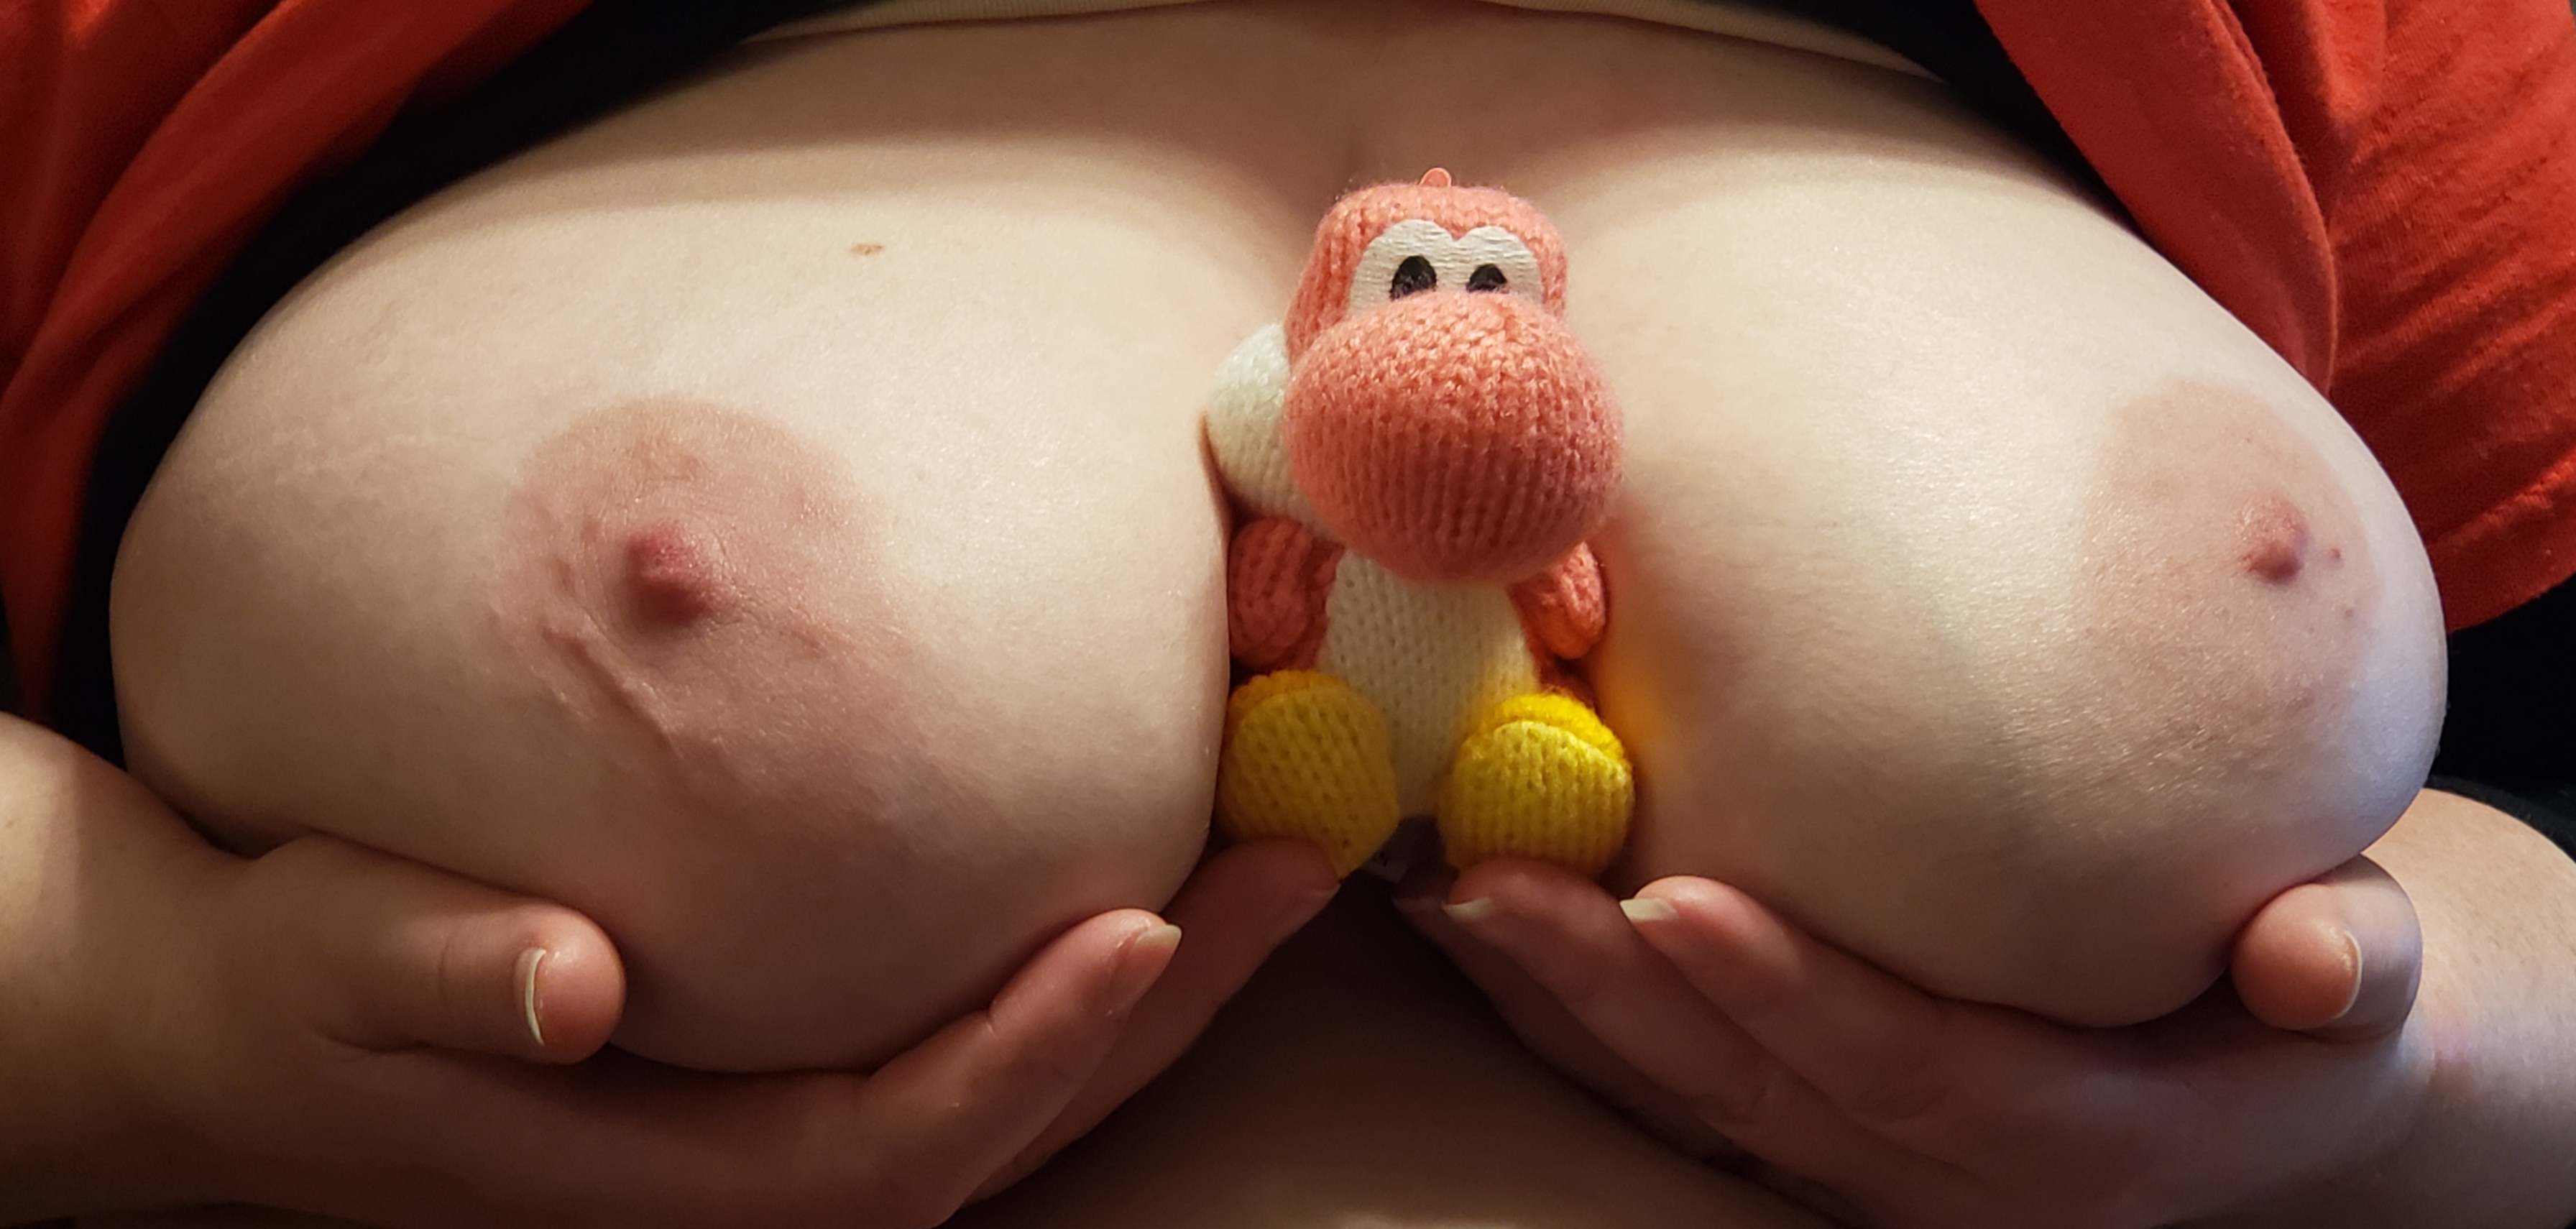 Yoshi Wants To Say Hi And I Want You To Look At My Boobs For A Bit. [F37] Porn Pic